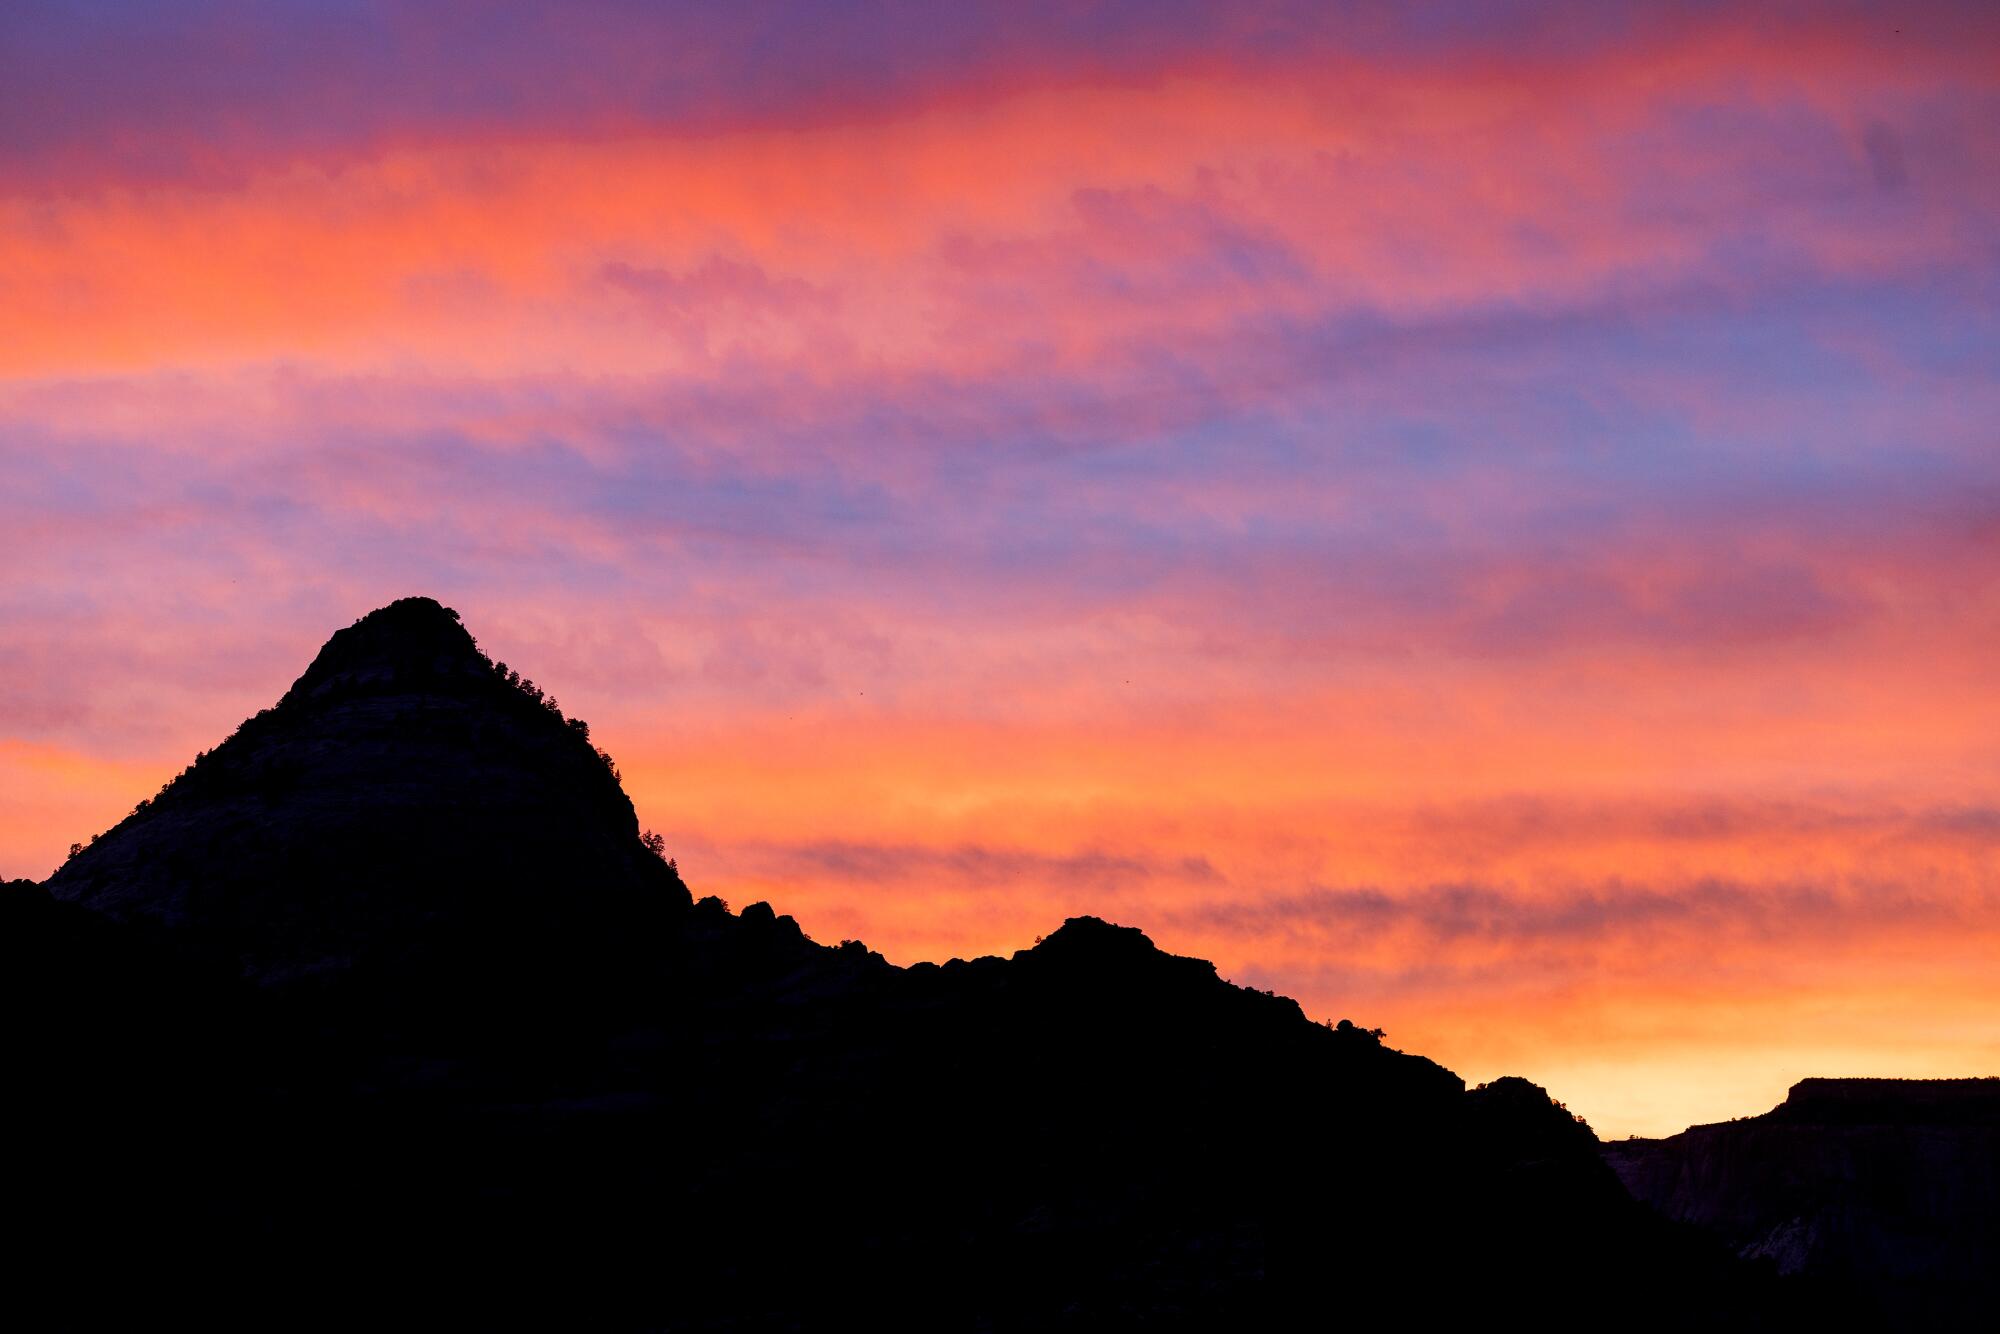 The setting suns casts a colorful palette in the skies above Zion Canyon at the end of the Canyon Overlook trail 